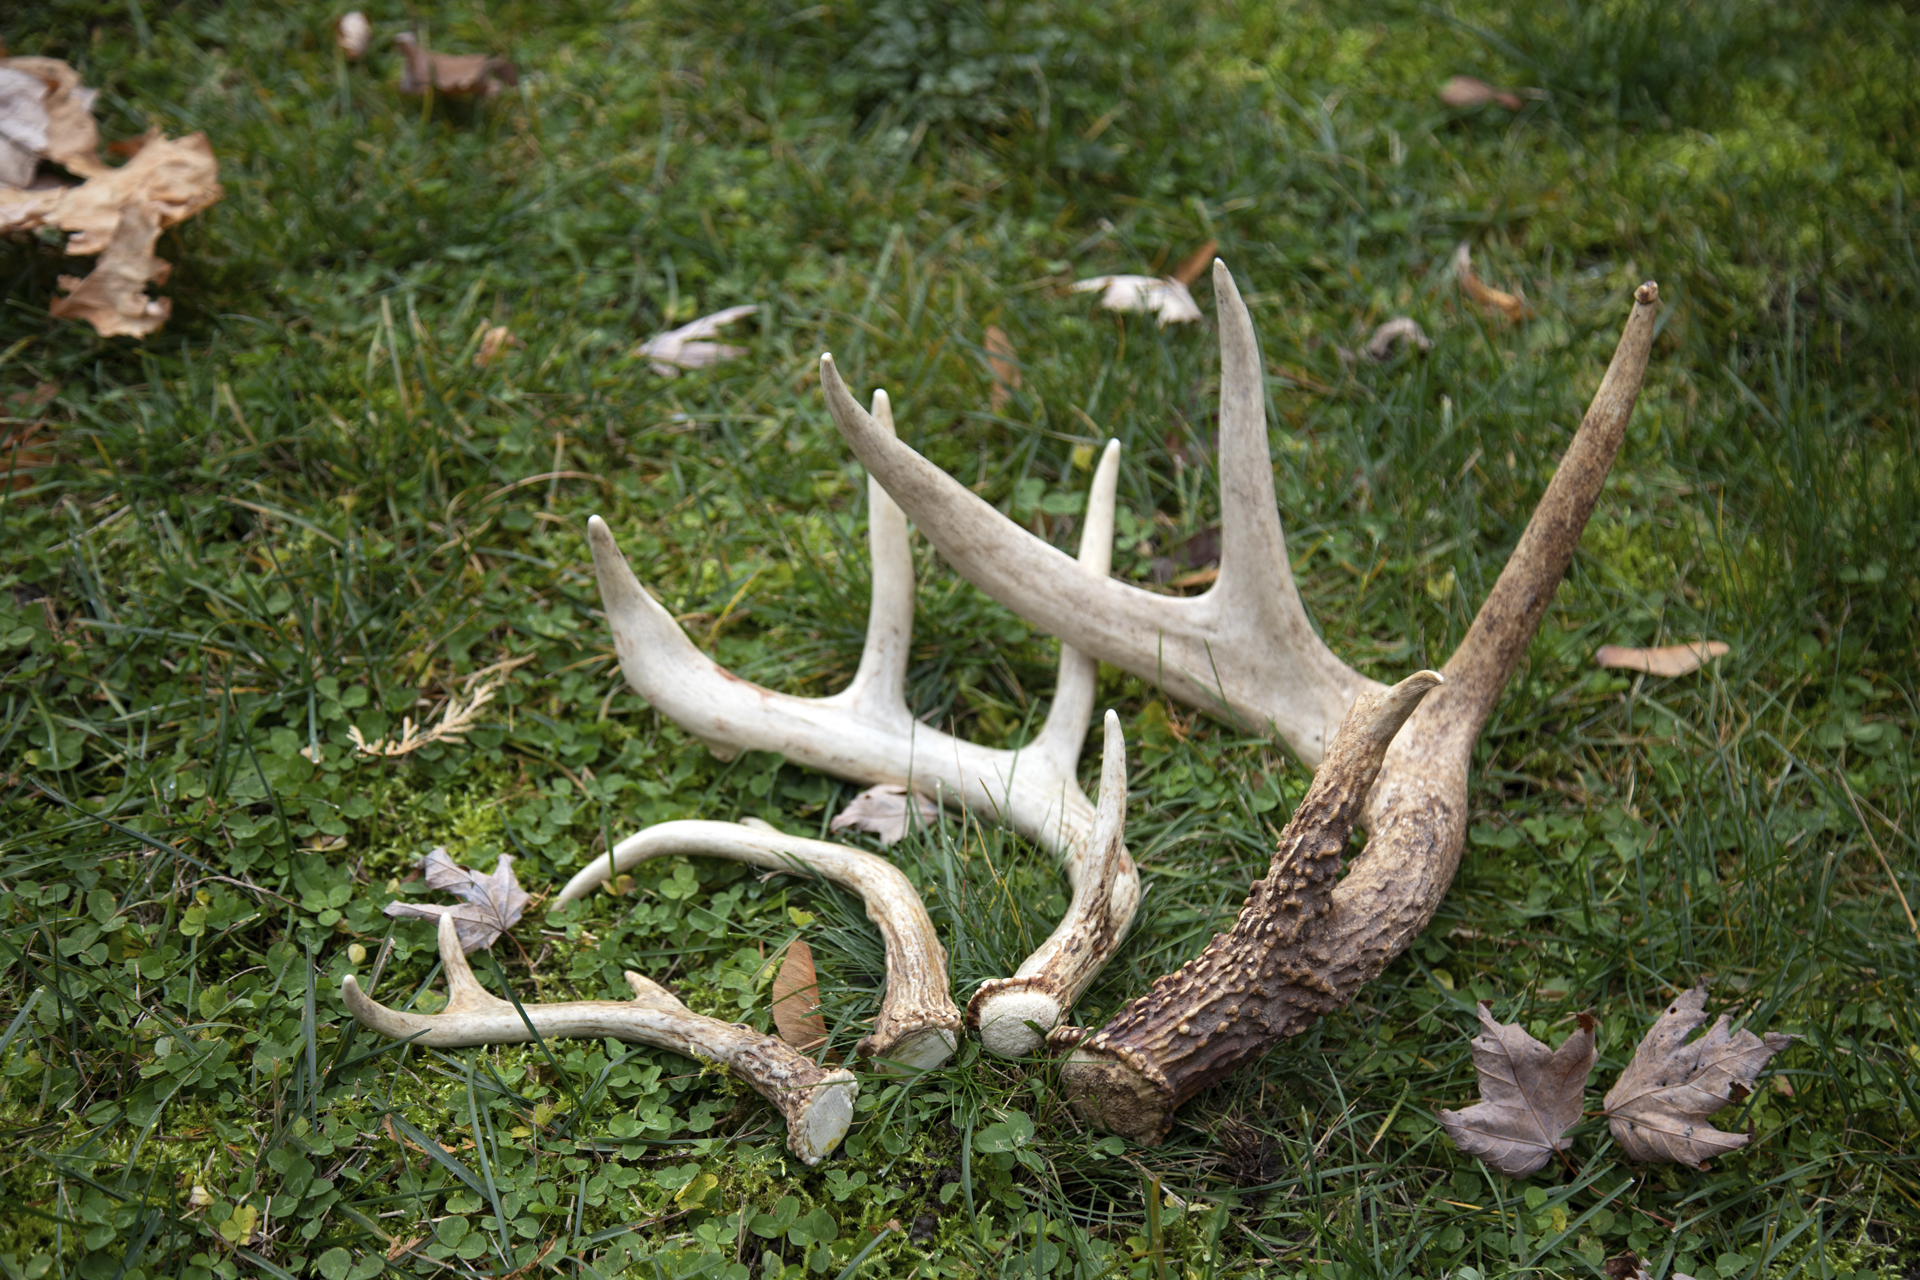 4 deer antlers sitting on grass with dead leafs. They are in order from smallest to largest.